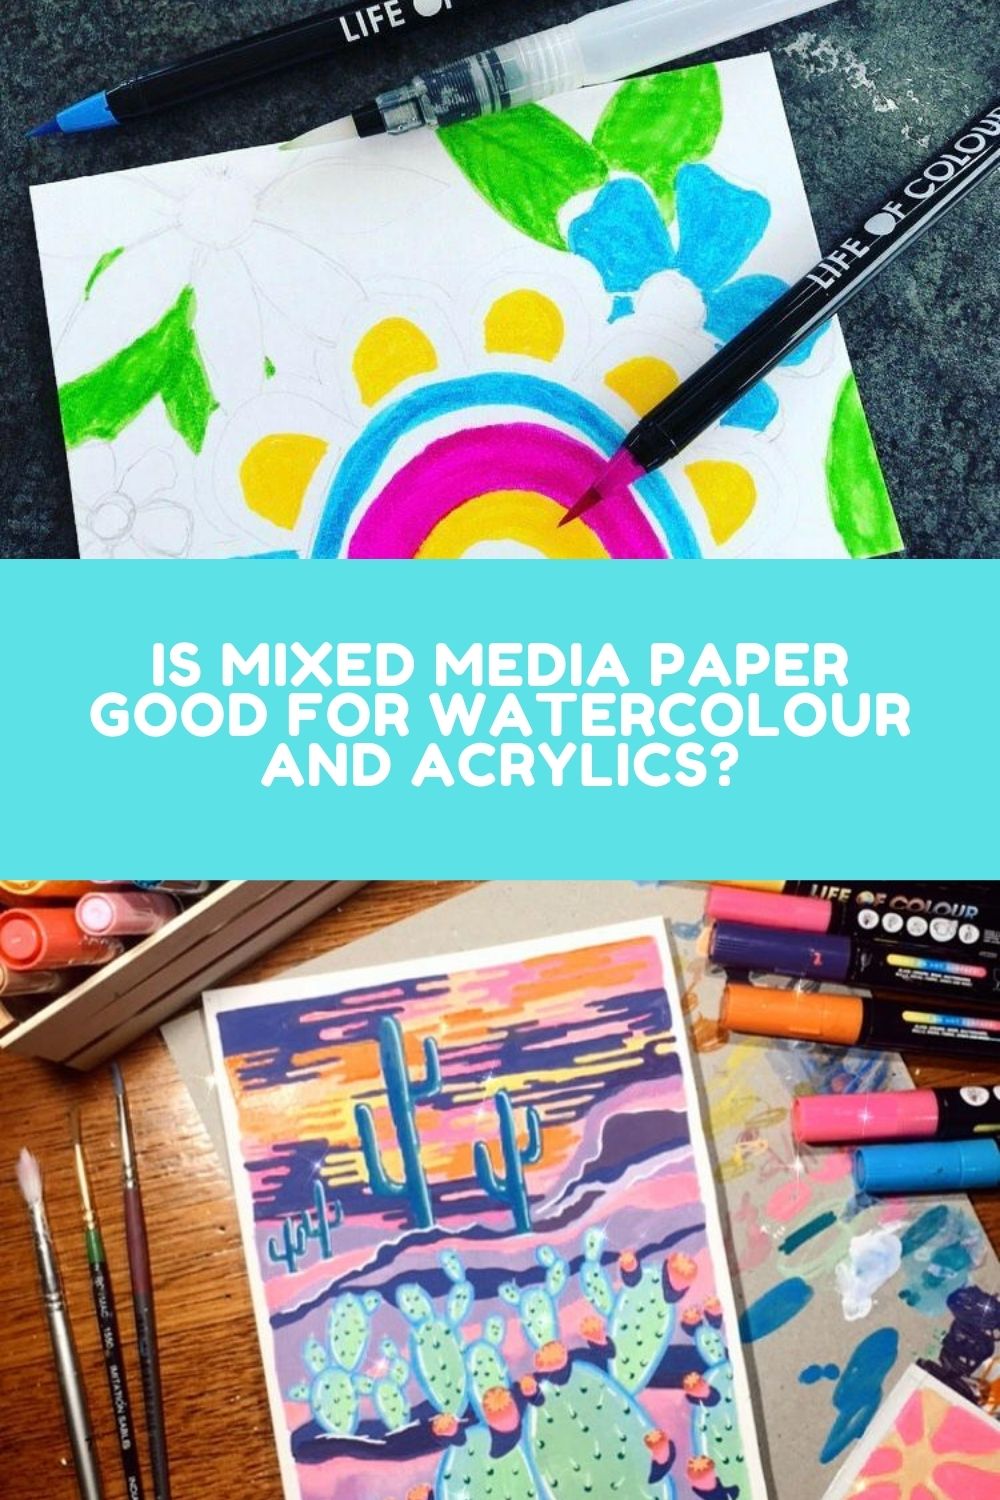 What is mixed media paper good for?